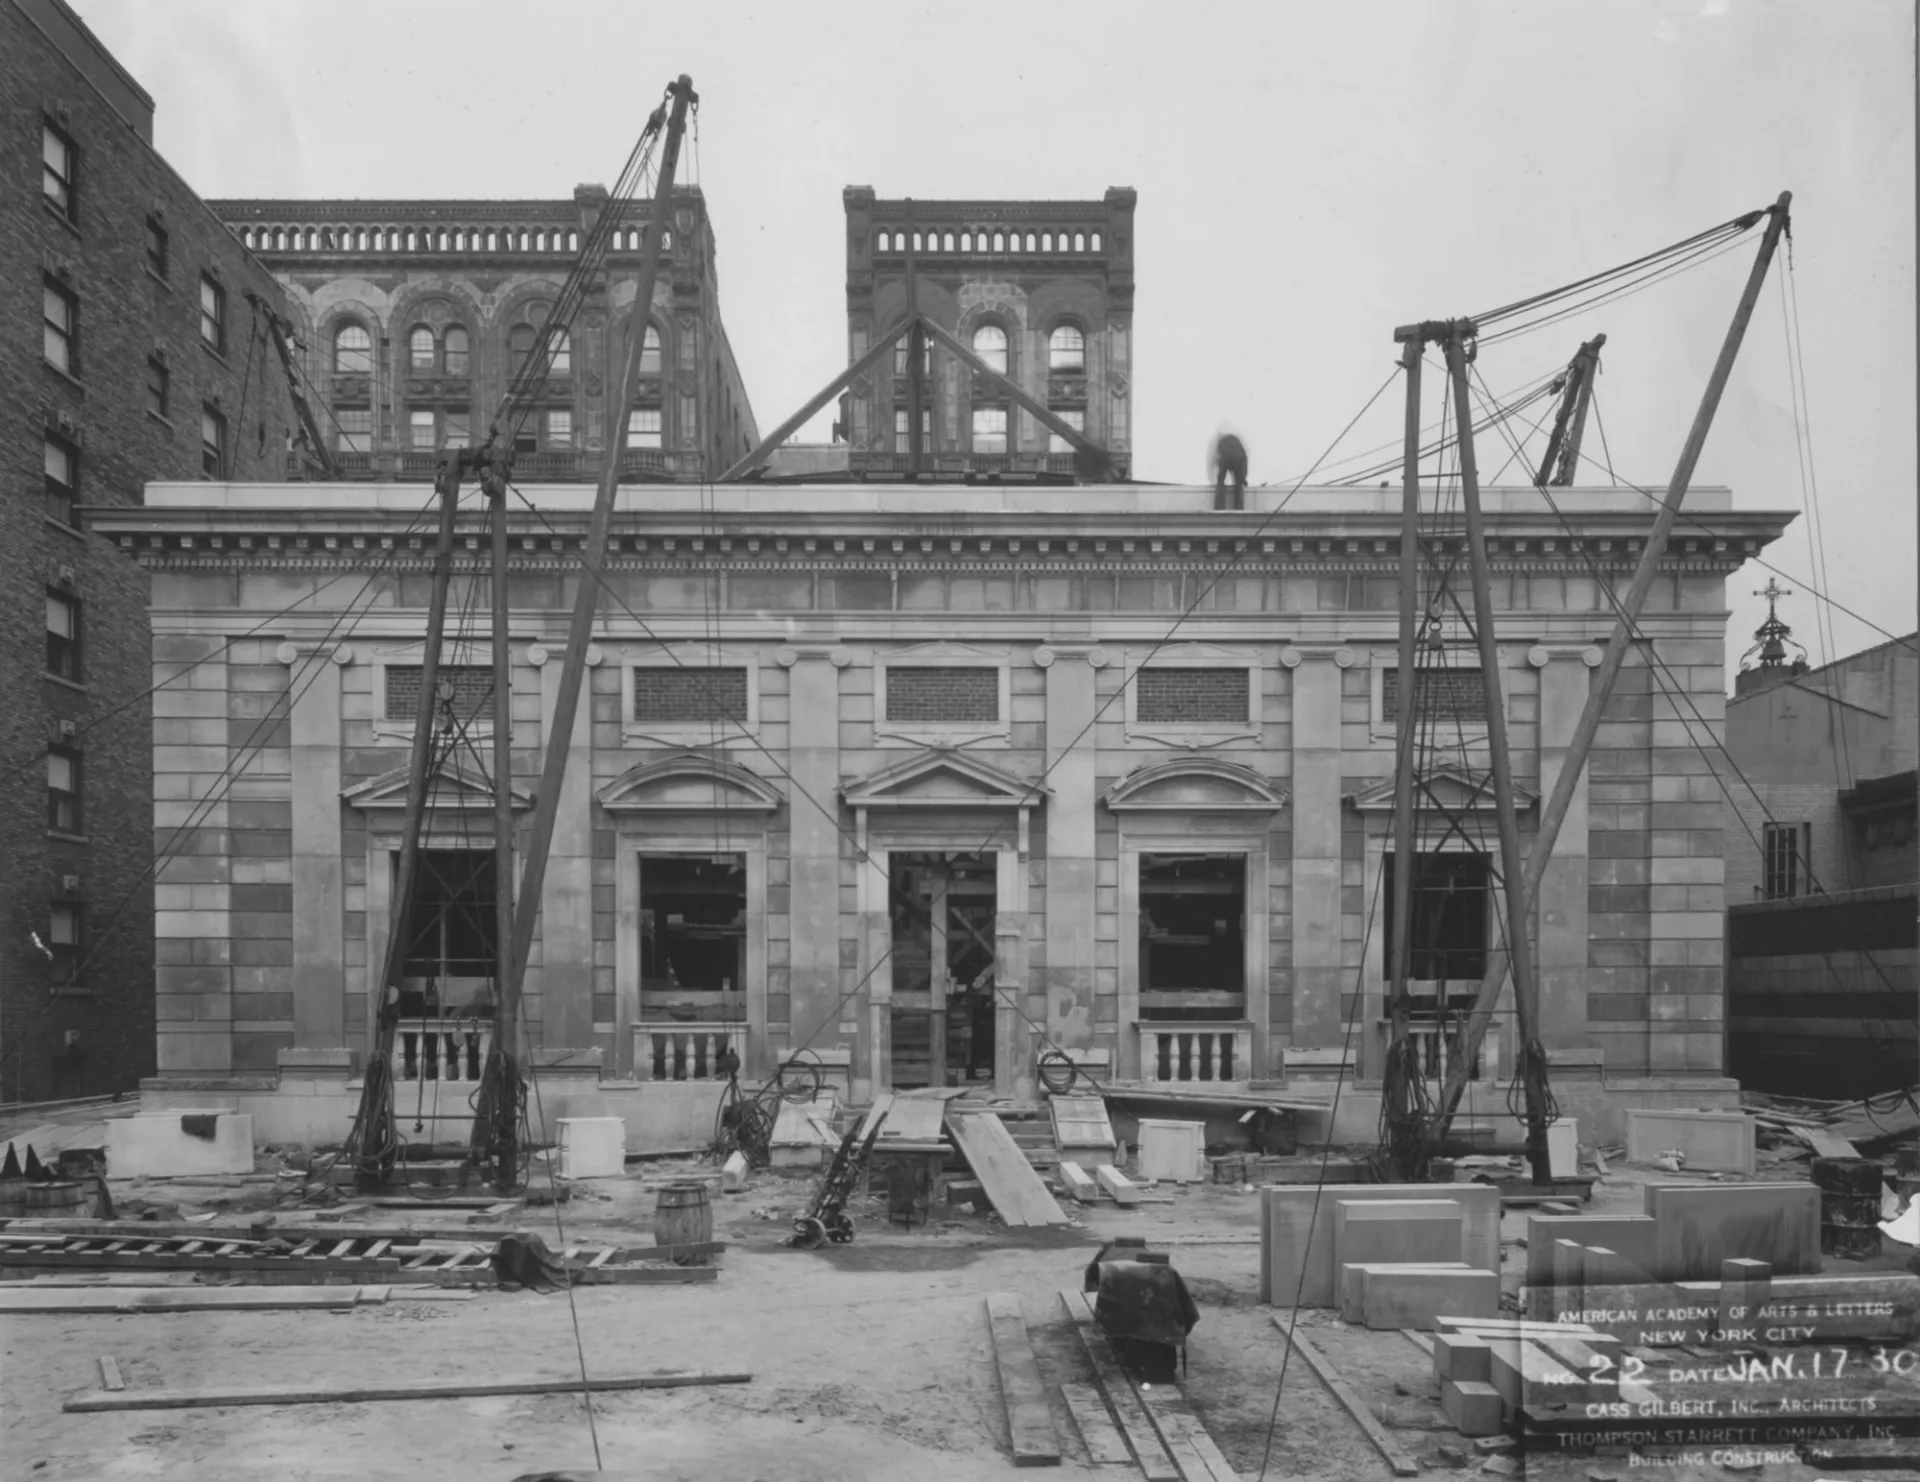 A black and white photograph of Arts and Letters's neoclassical building with cranes and other building materials visible in the foreground.